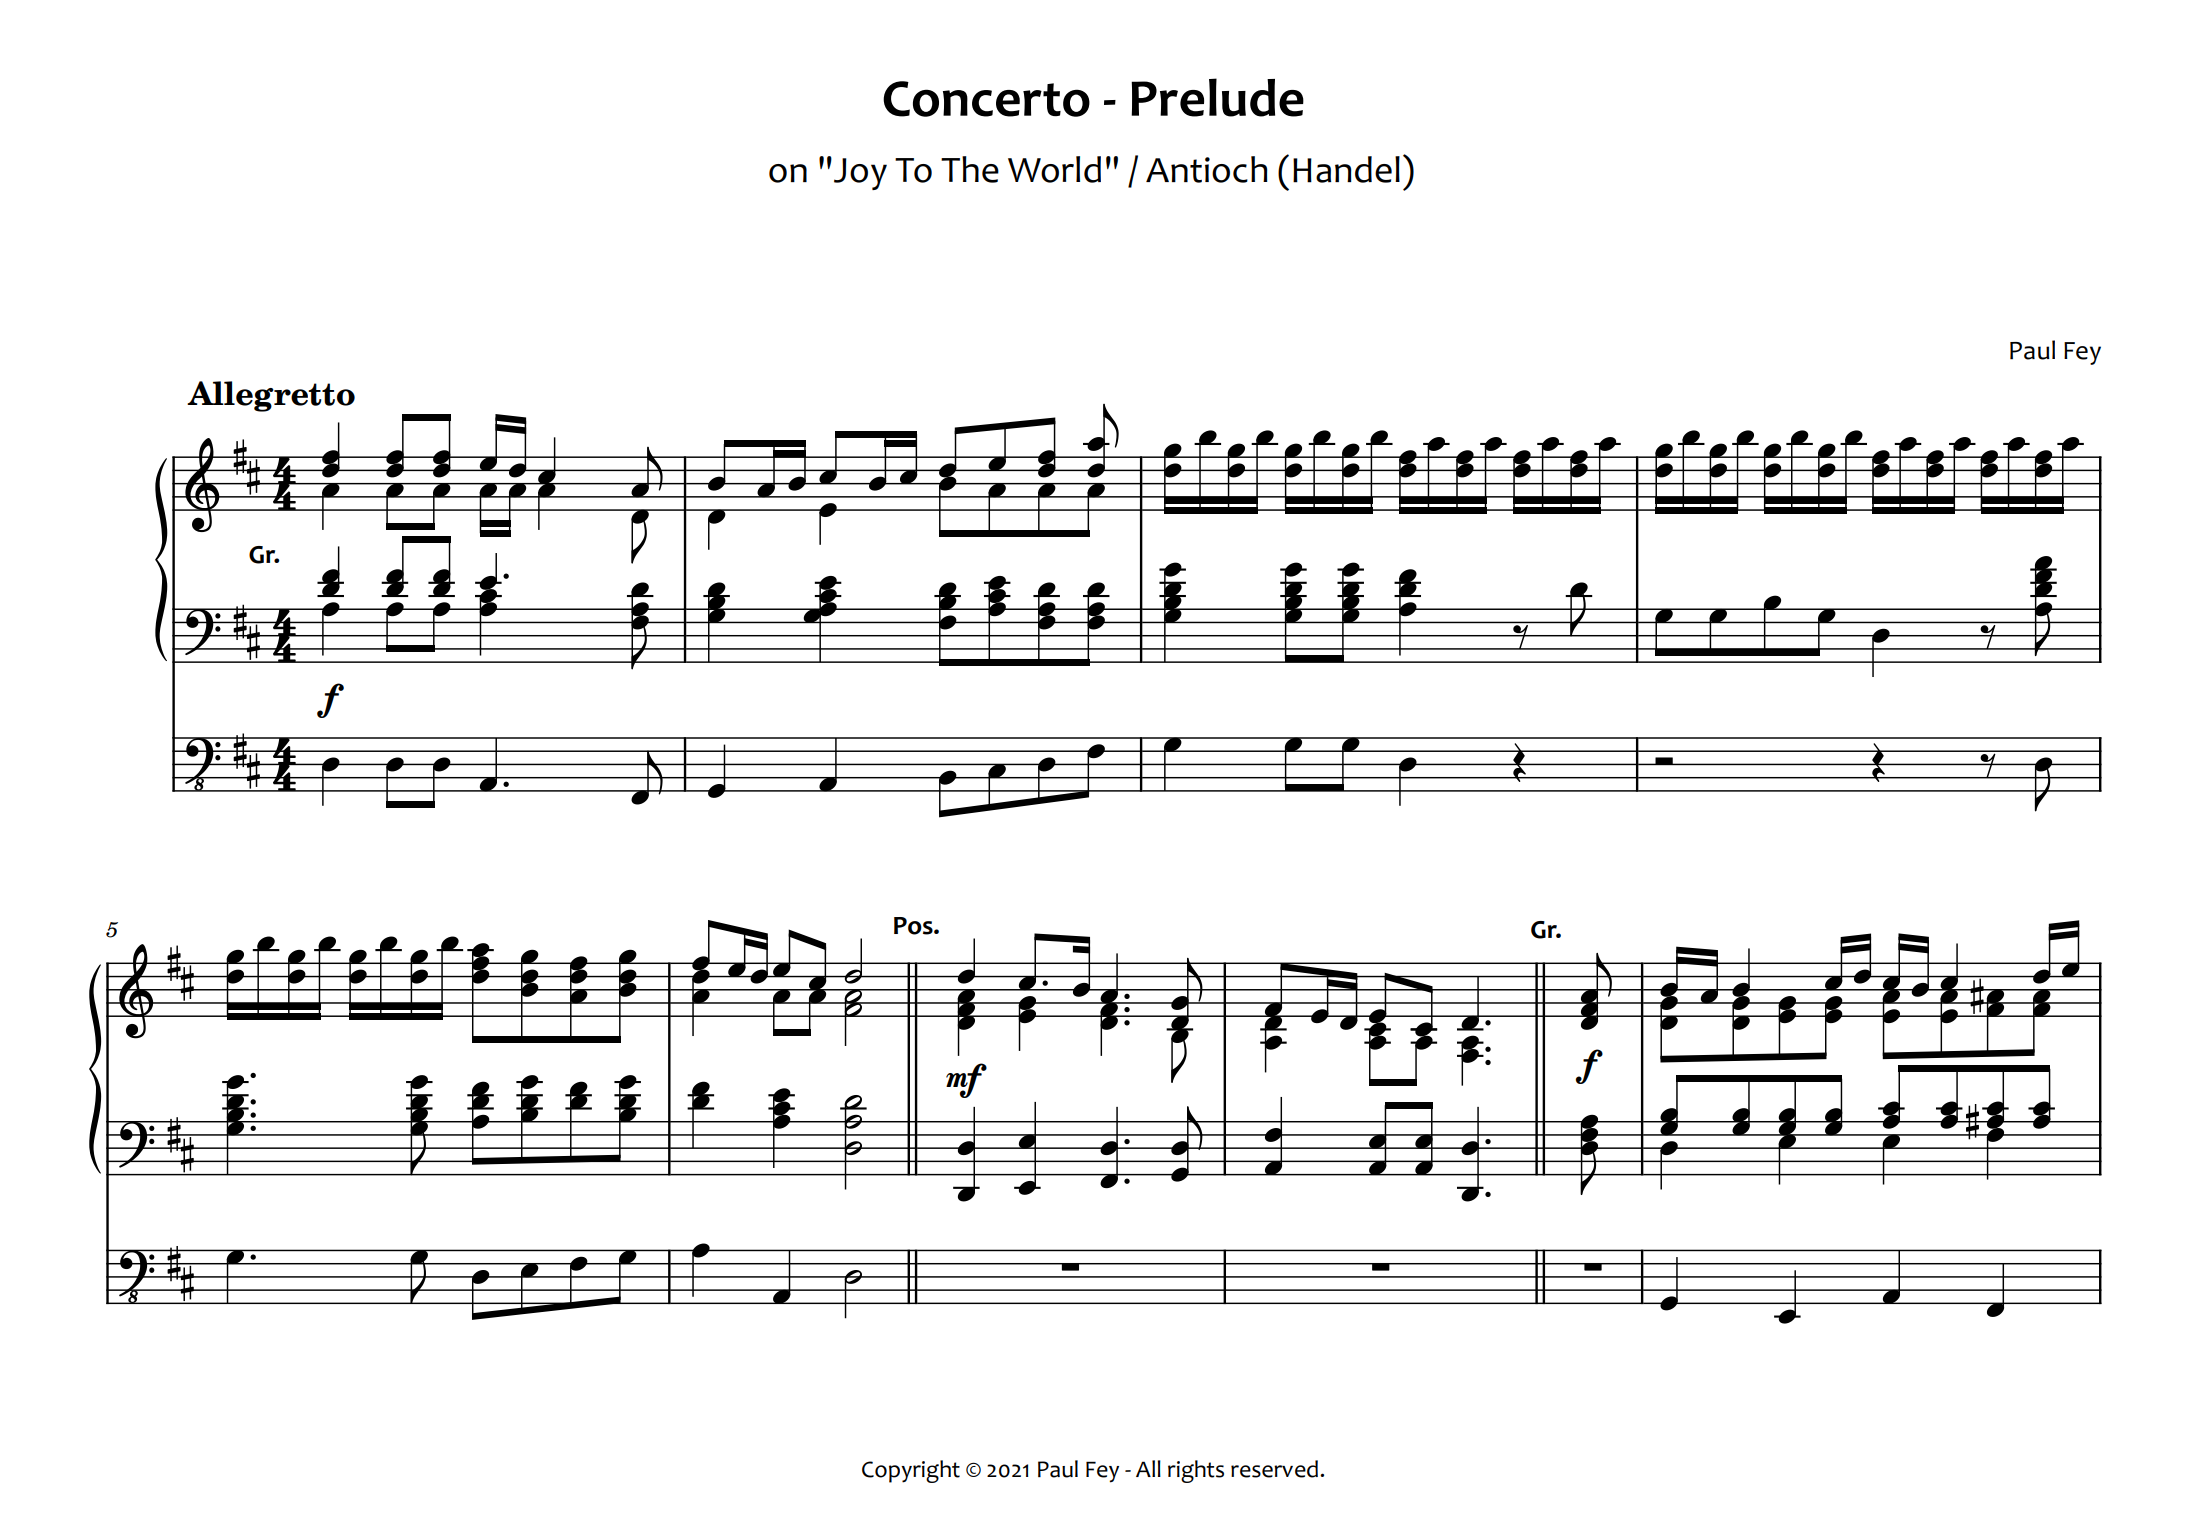 Concerto Prelude on "Joy to the World" (Sheet Music) - Pipe Organ Music by Paul Fey